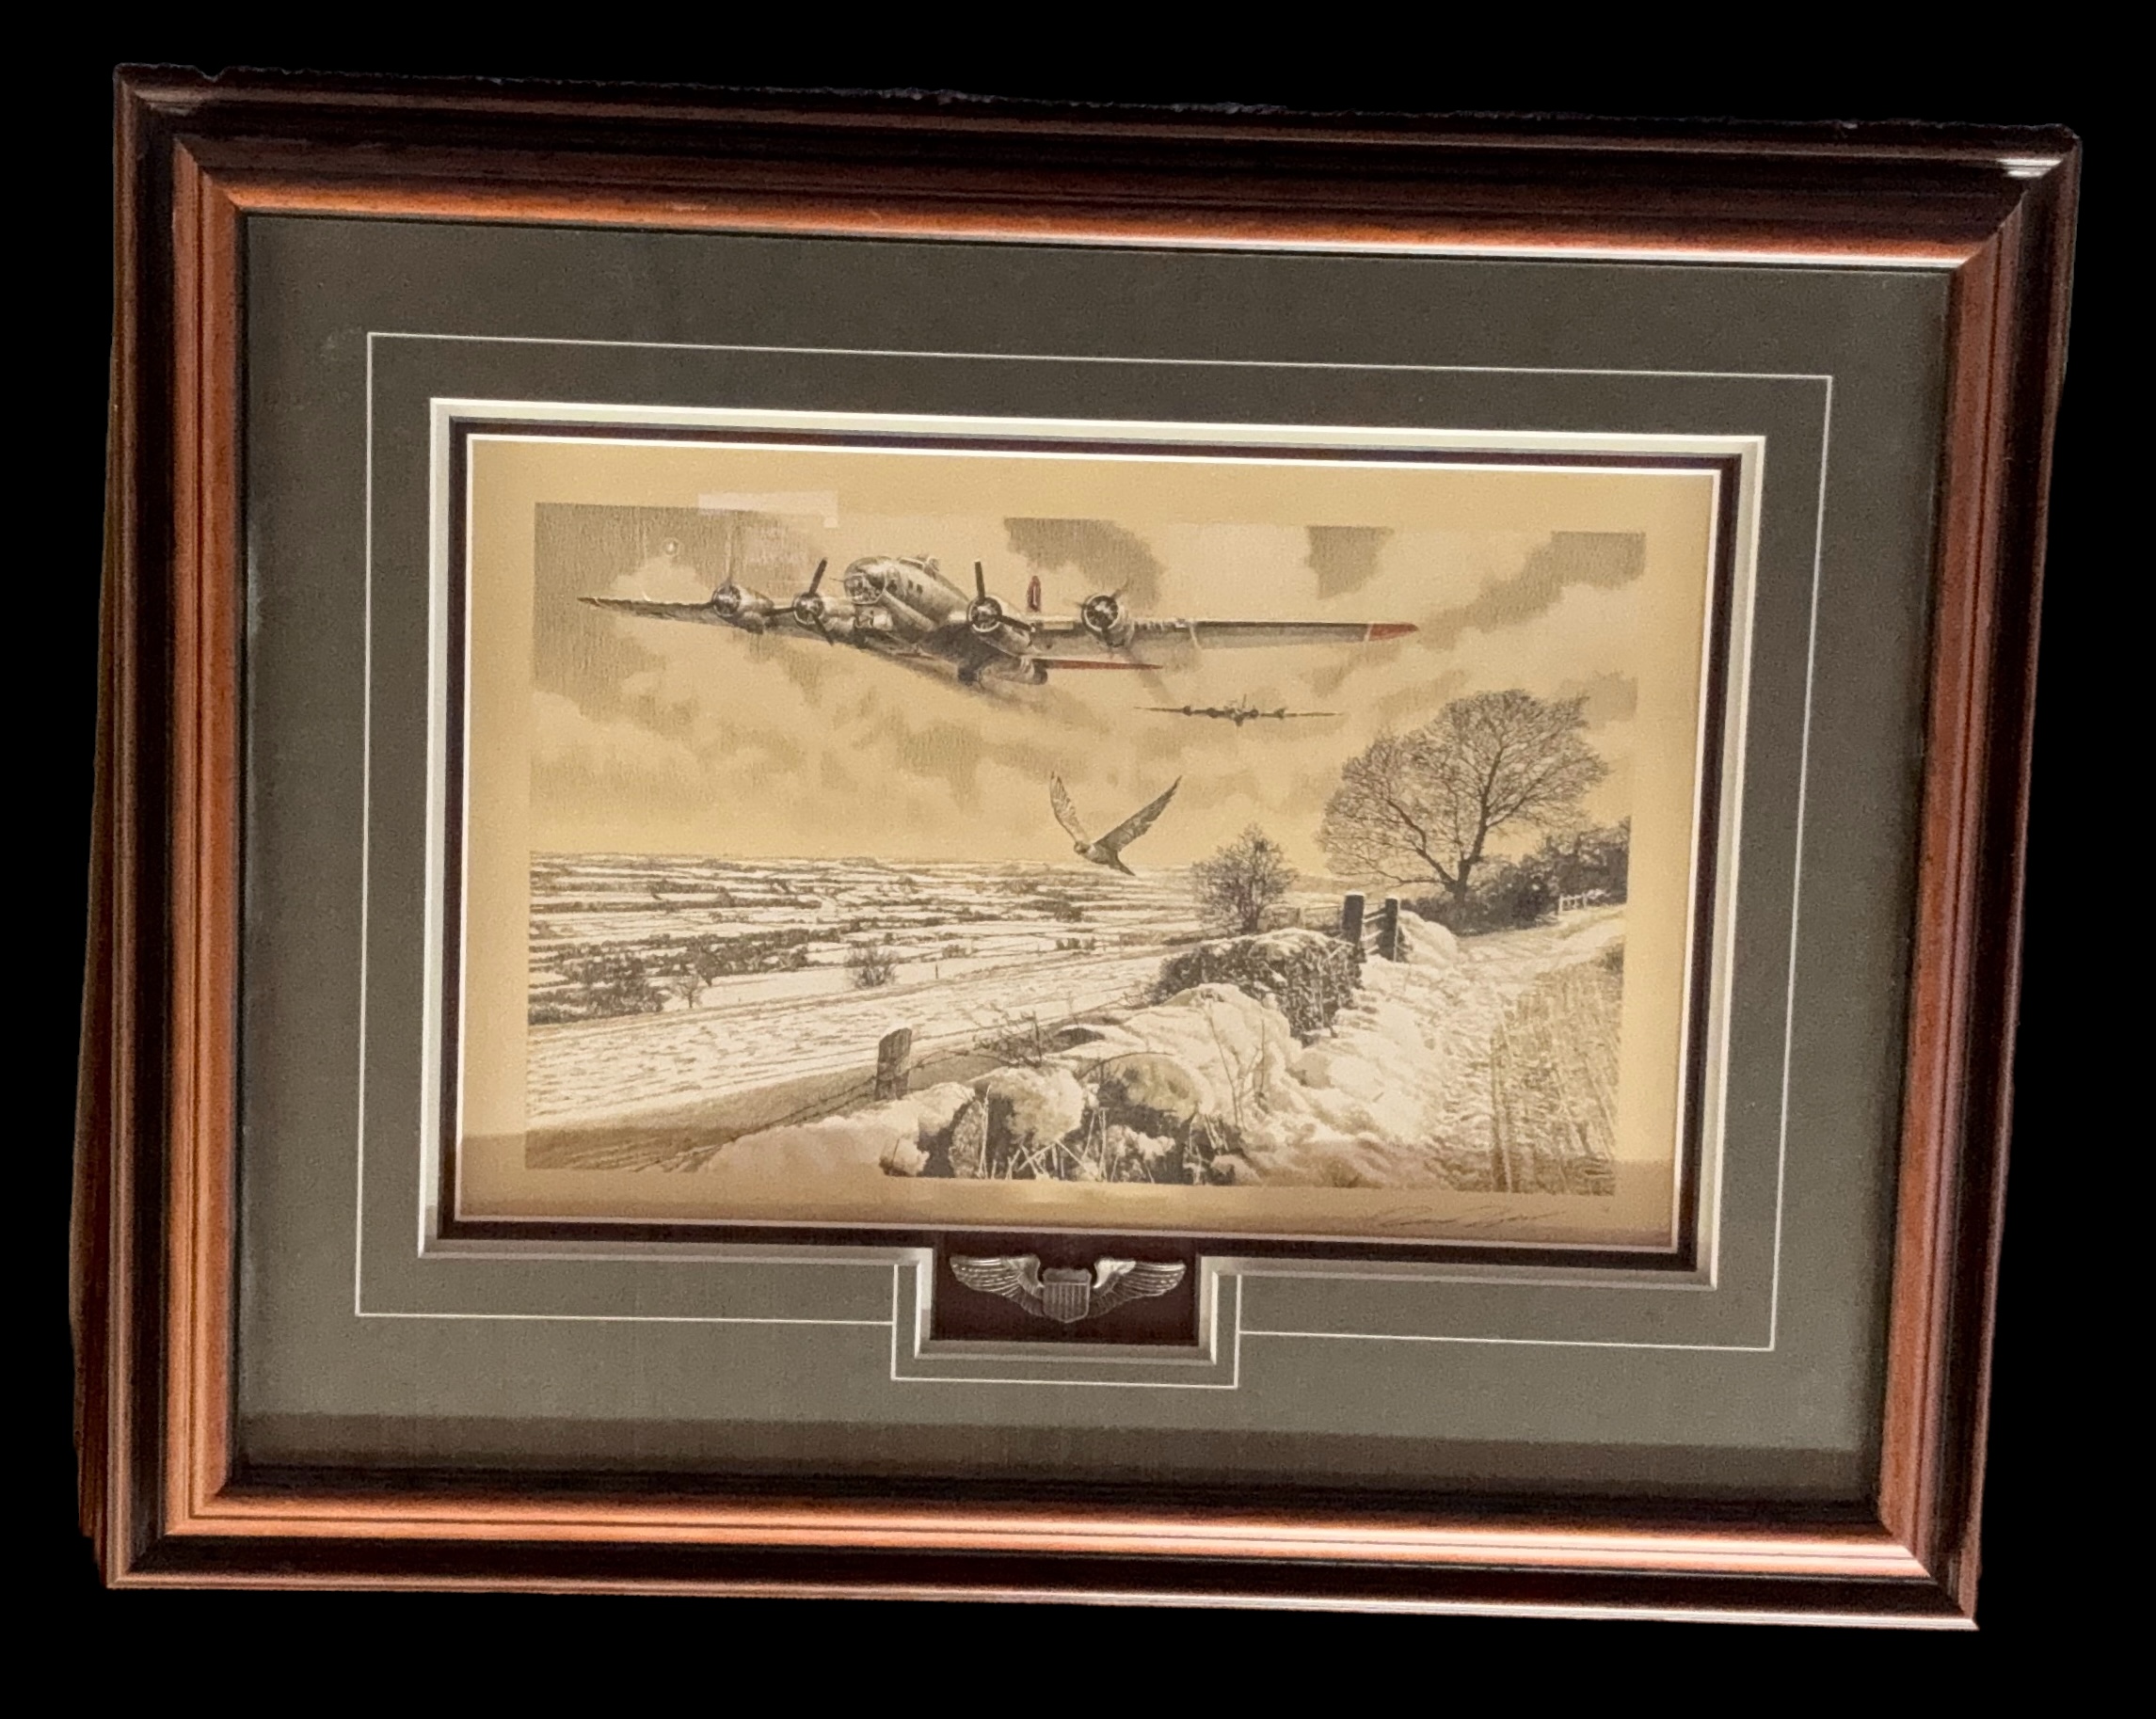 WW2 Print by artist Robert Taylor Limited. Picturing WW2 plane flying over a field, USAF wings - Image 3 of 3